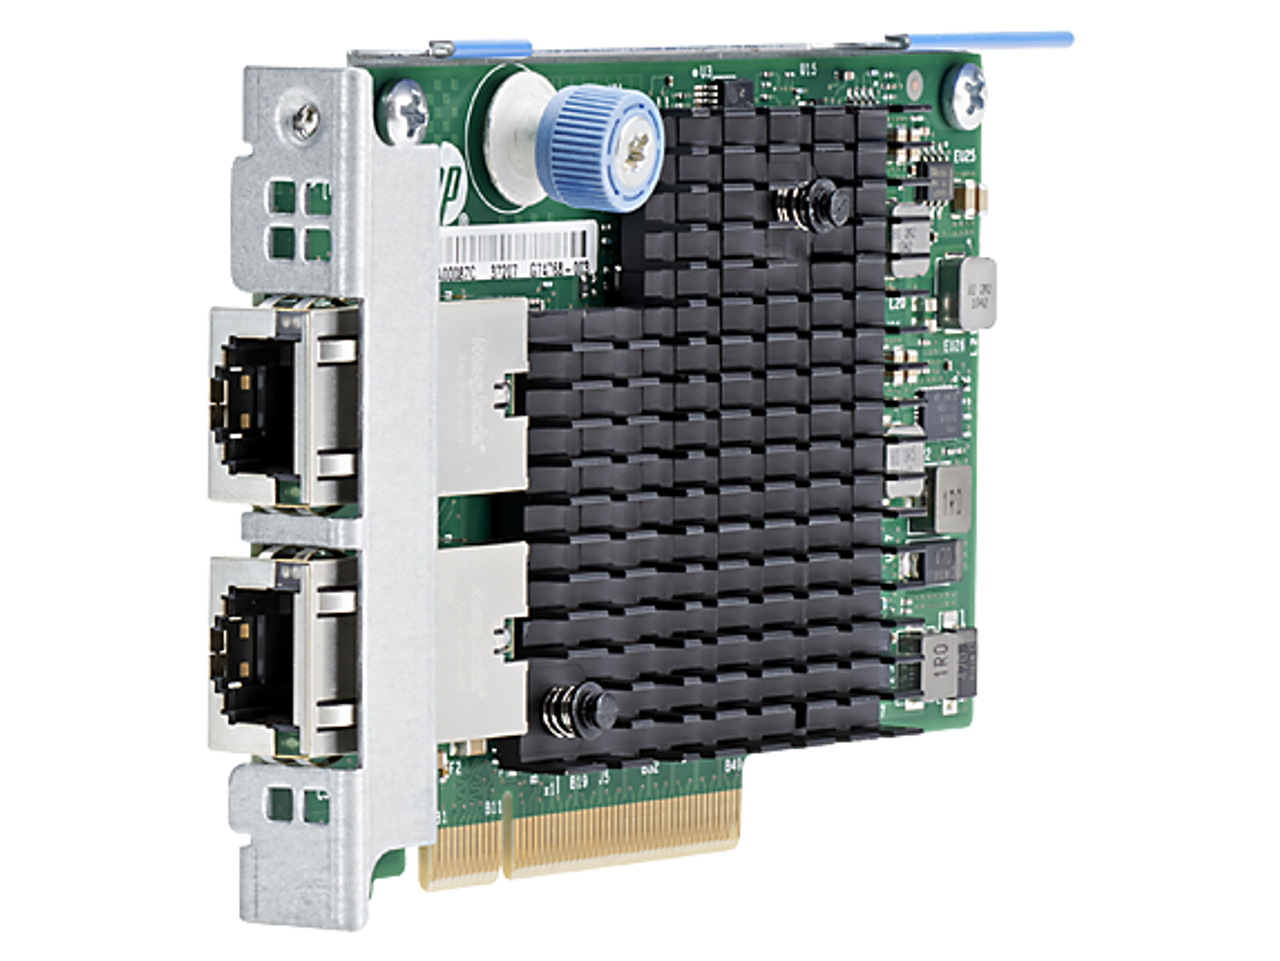 HPE 790316-001 10GbE 2-Port 562SFP+ Network Adapter for G9 G10 